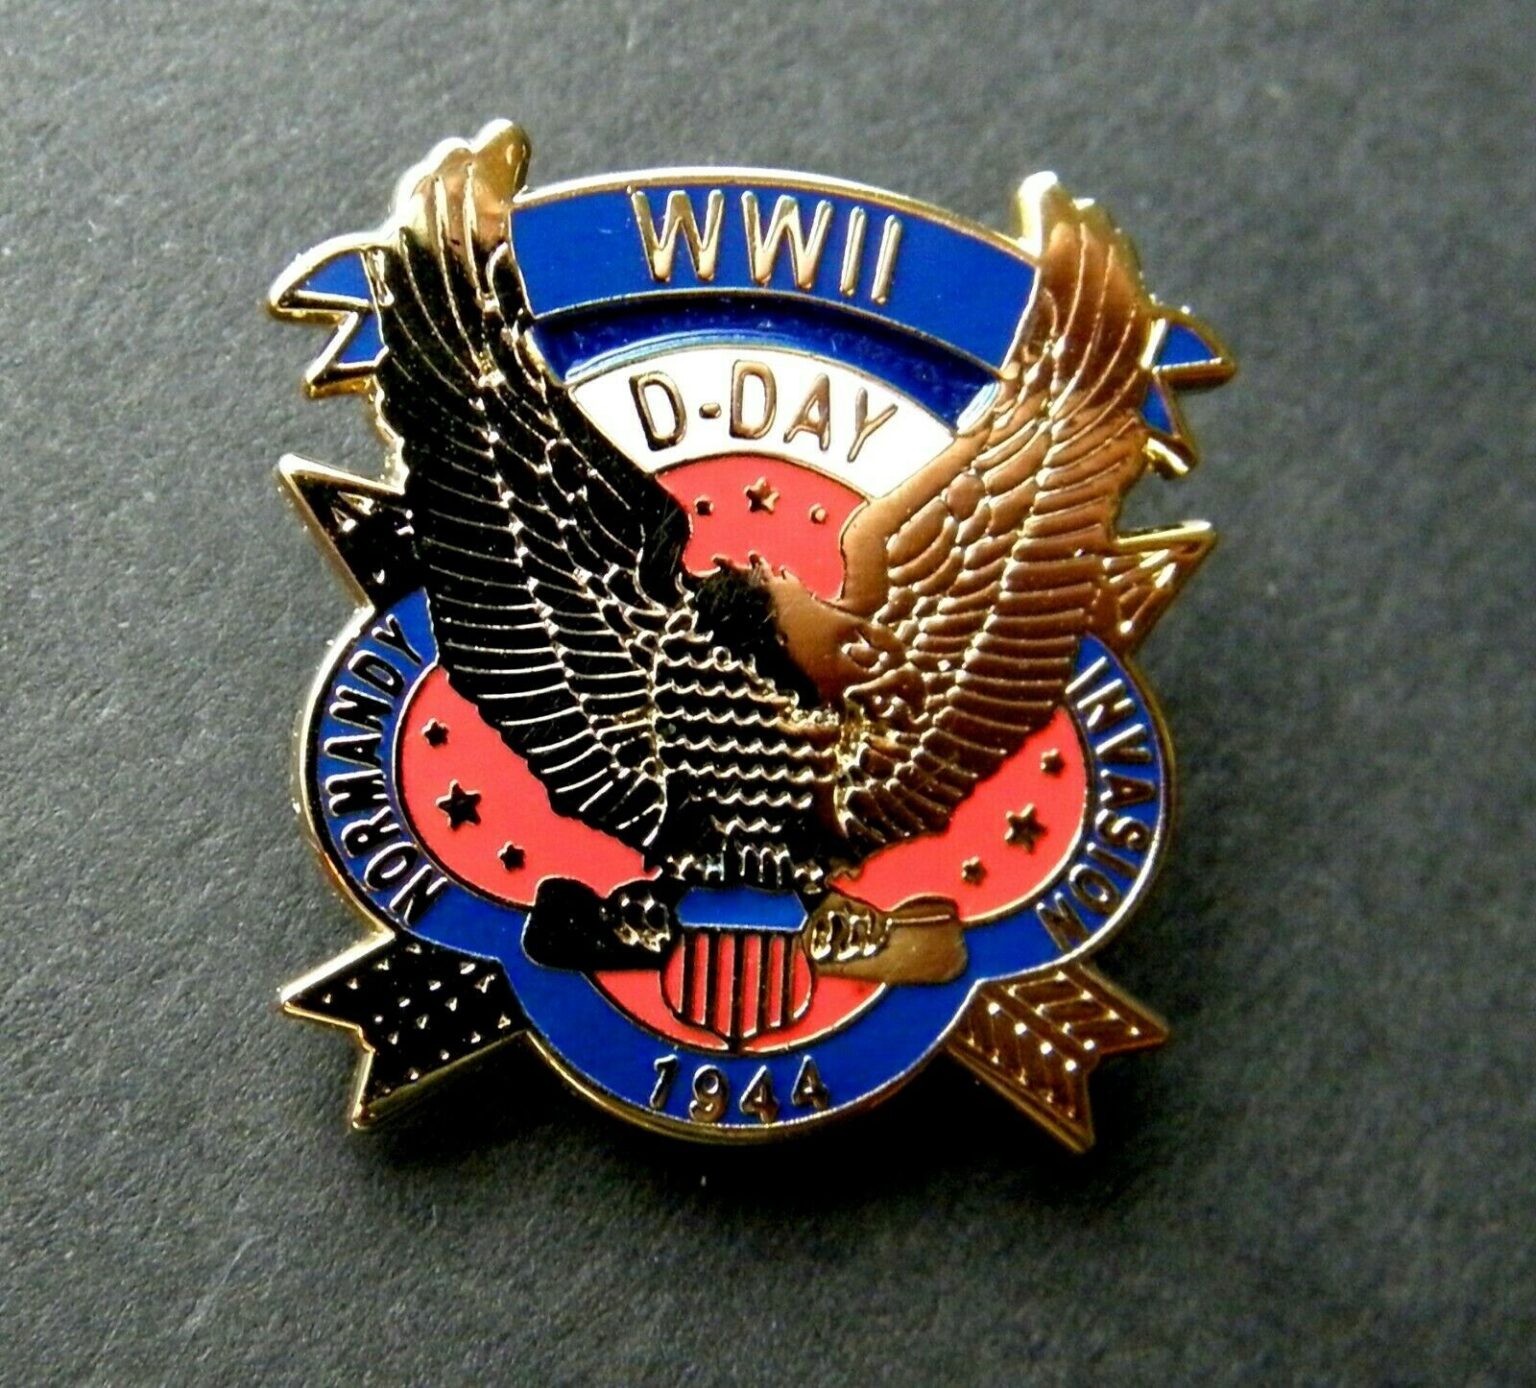 Wwii World War 2 D Day Normandy Invasion 1944 Lapel Pin 1